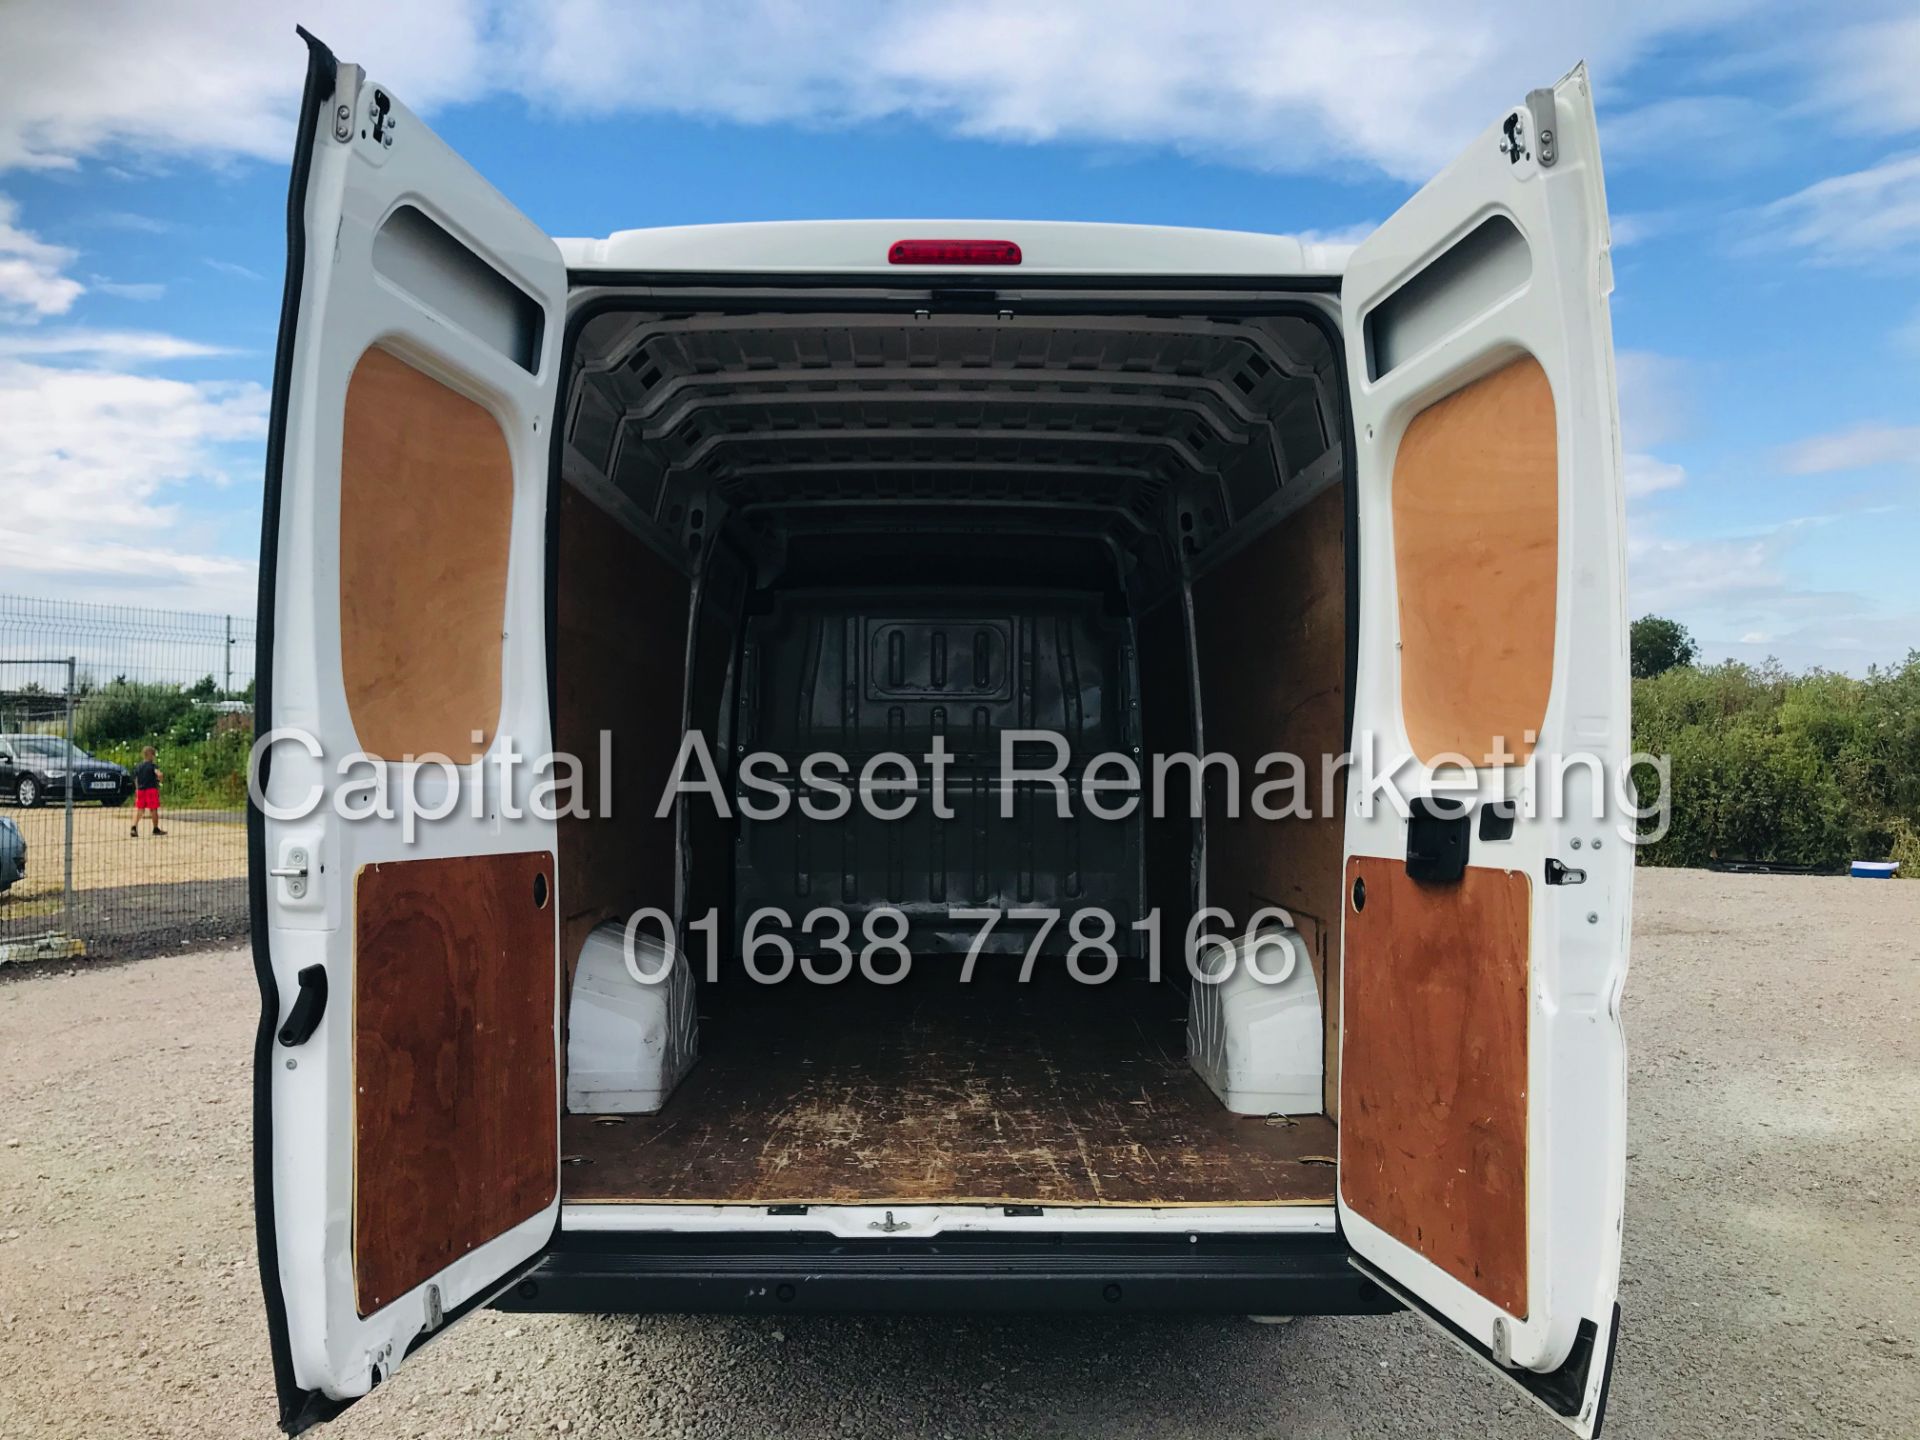 (ON SALE) PEUGEOT BOXER 2.0 BLUE-HDI "PROFESSIONAL" L4 "MAXI" 1 OWNER (2019 MODEL) AIR CON - SAT NAV - Image 23 of 23